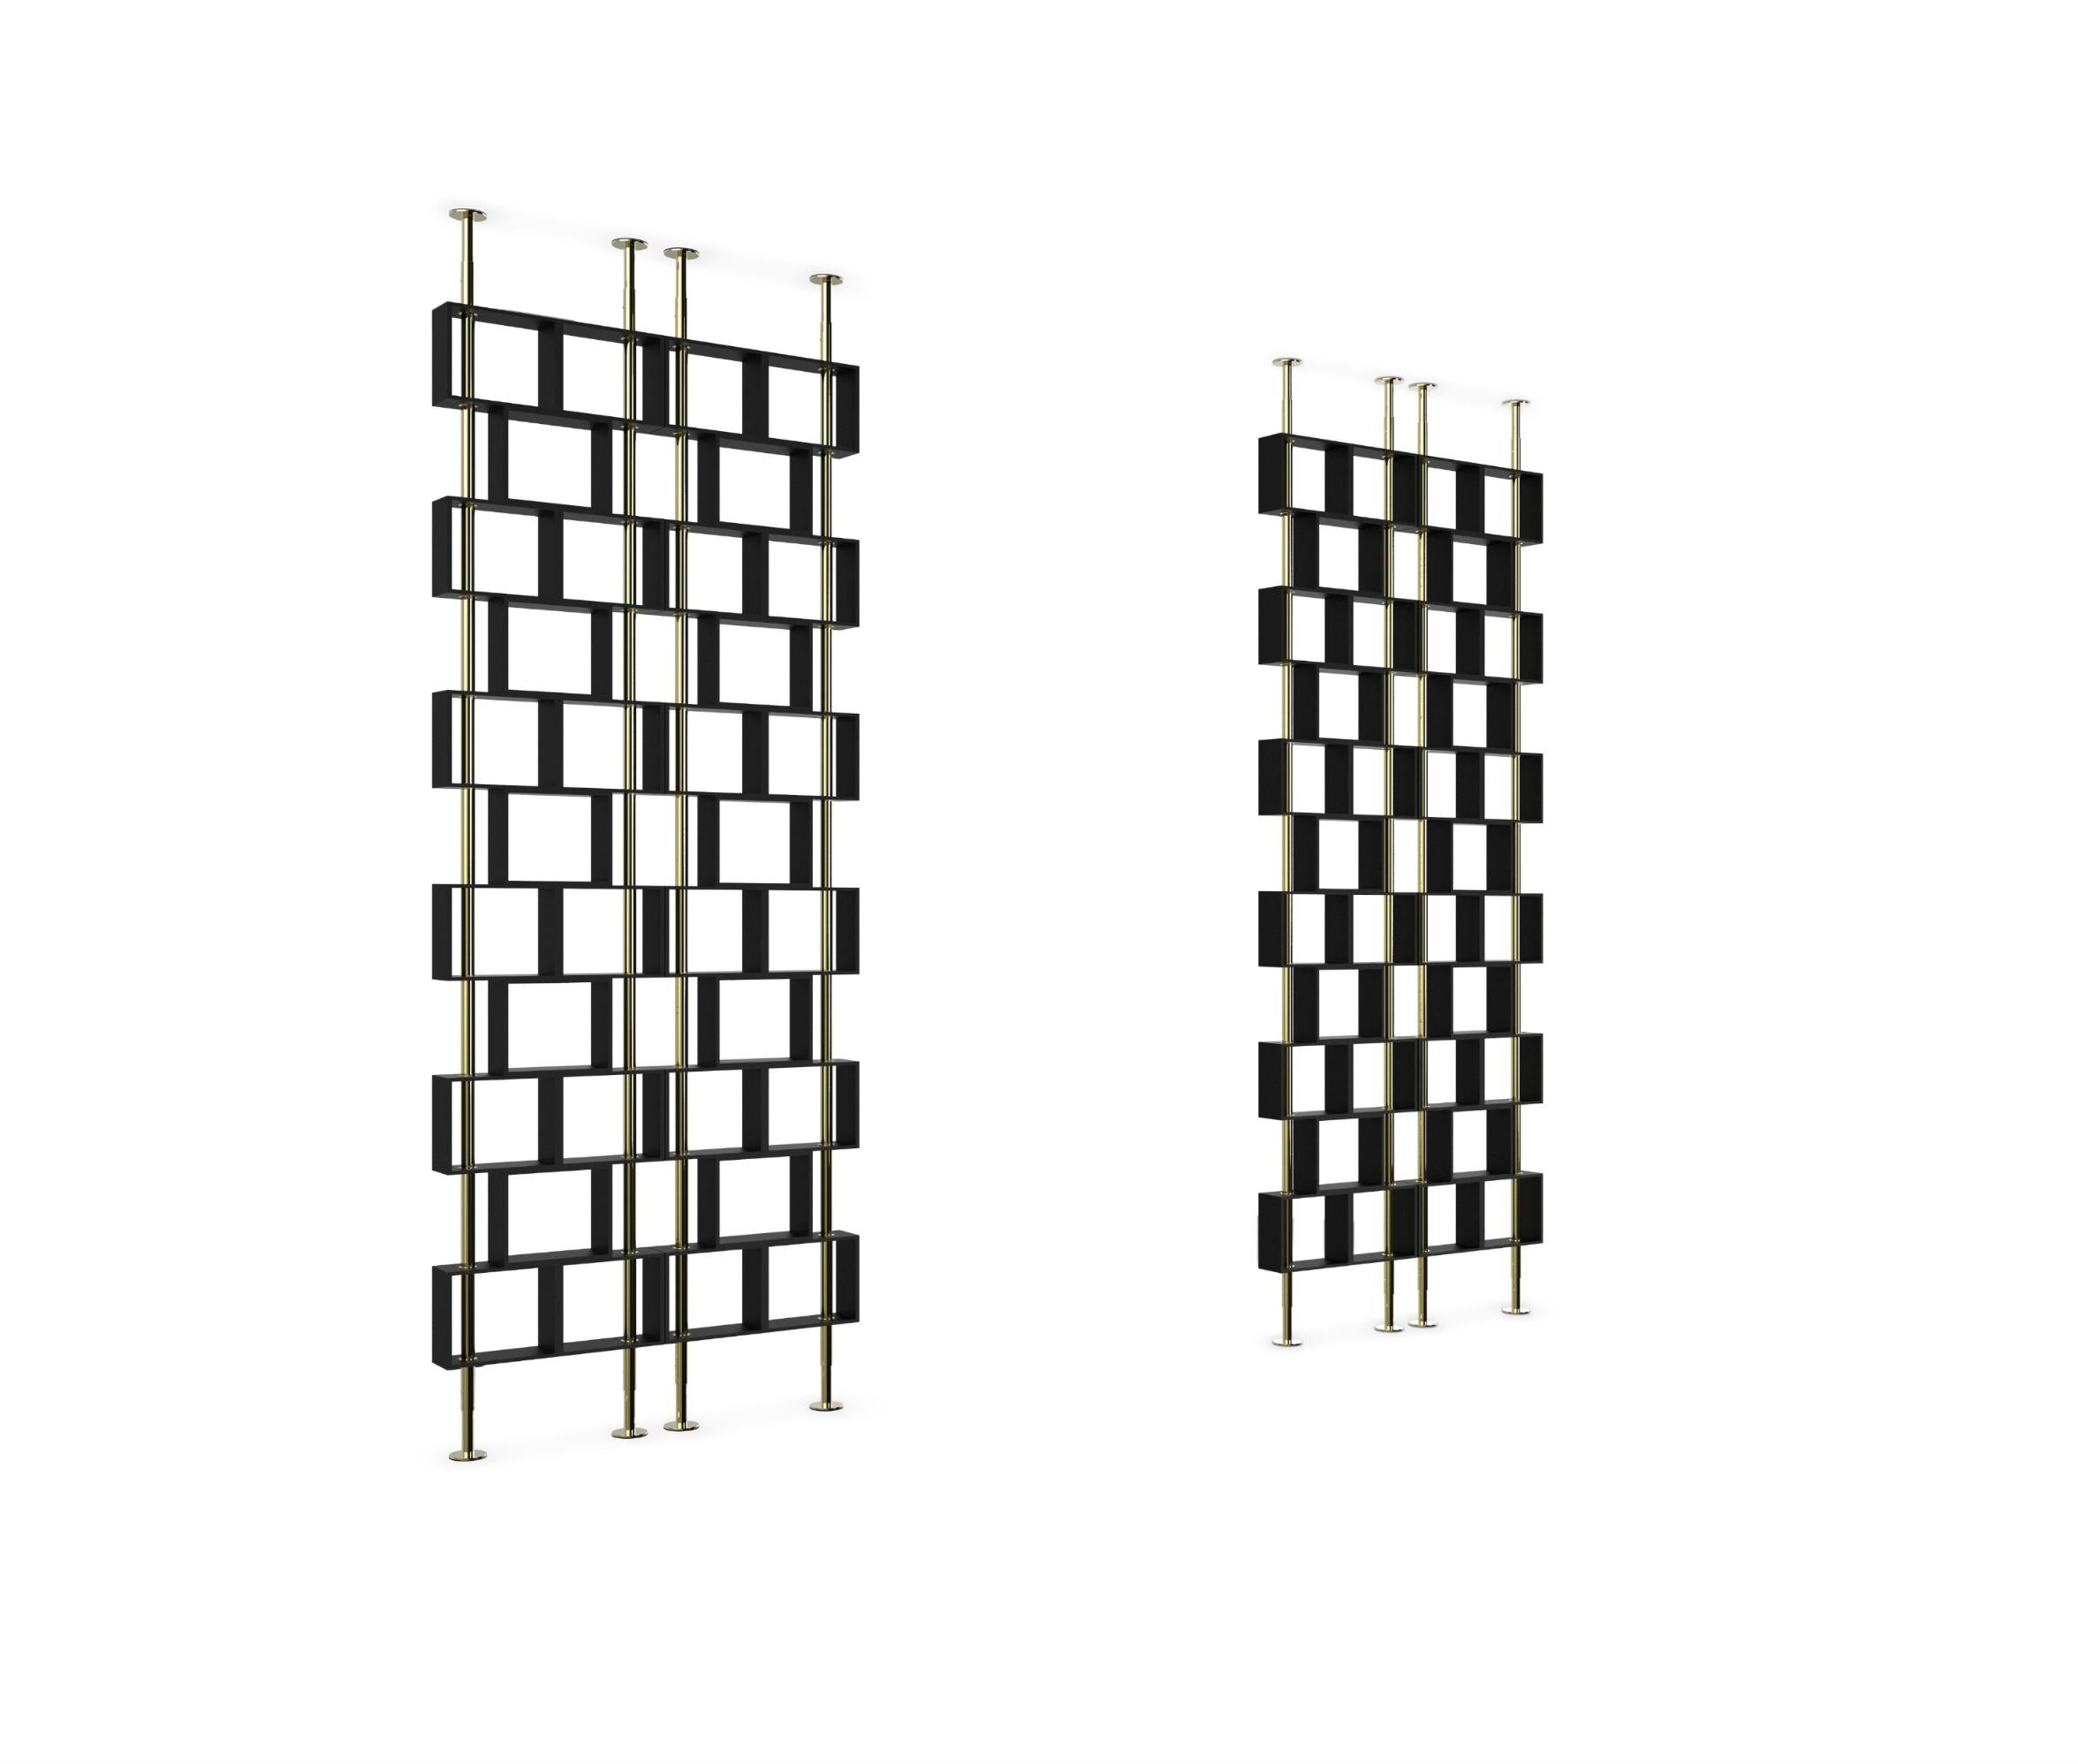 A cubic shape museum was built in Hanoi, Vietnam, to tell stories about its city and people. Hanoi screen pays tribute to these cubic forms, giving a modern feel to any interior. Made in gold plated brass and black matte lacquer, this wall screen